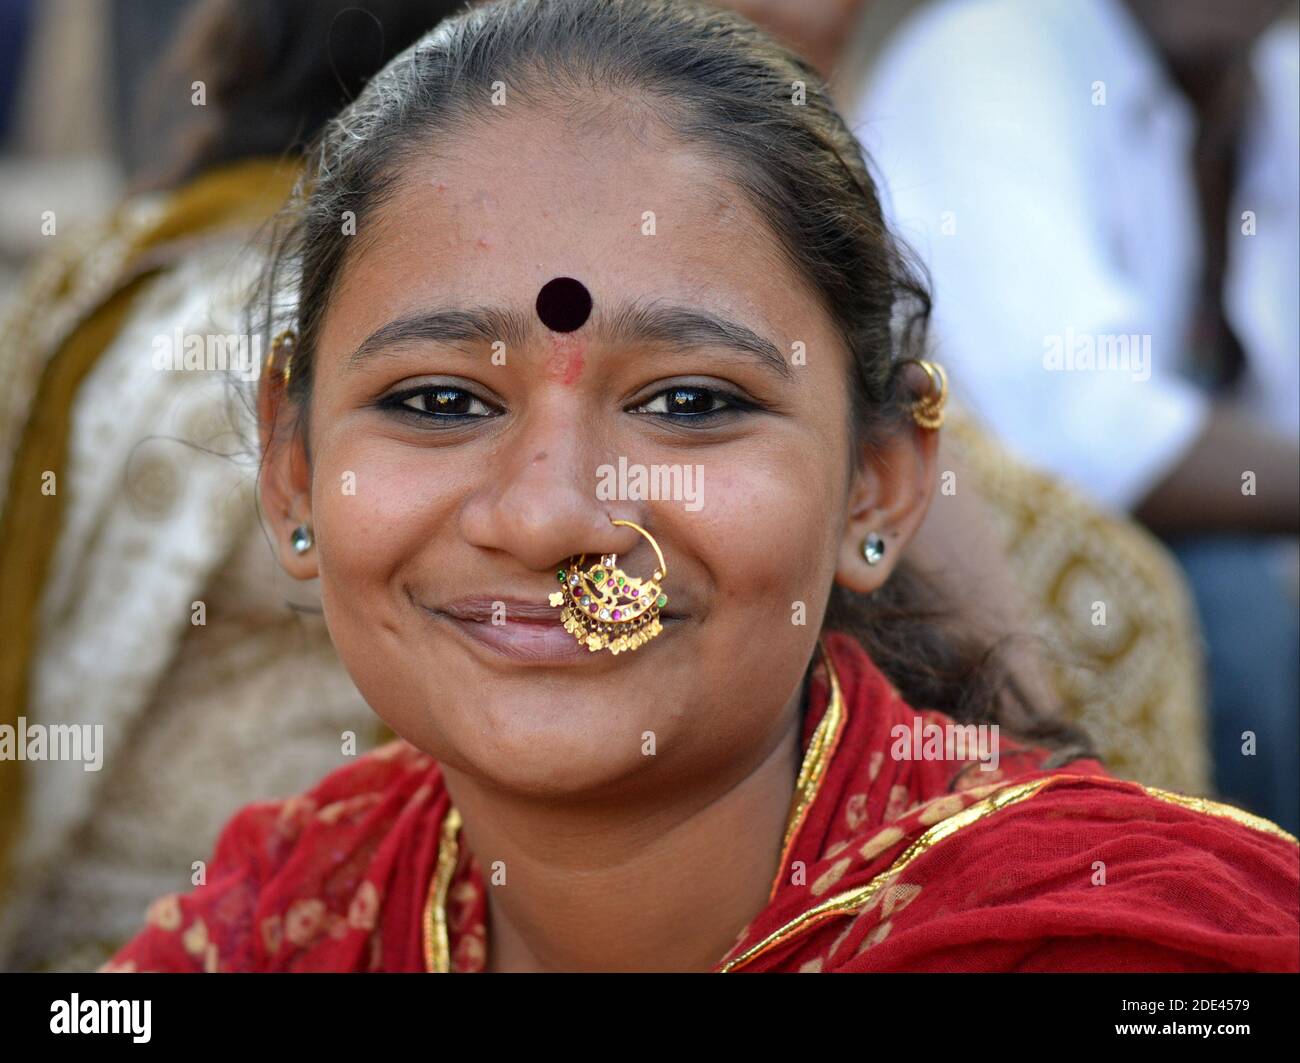 Young beautiful positive Indian Gujarati woman with large elaborate gold nose jewelry (nose ring) and large bindi on forehead smiles at camera. Stock Photo